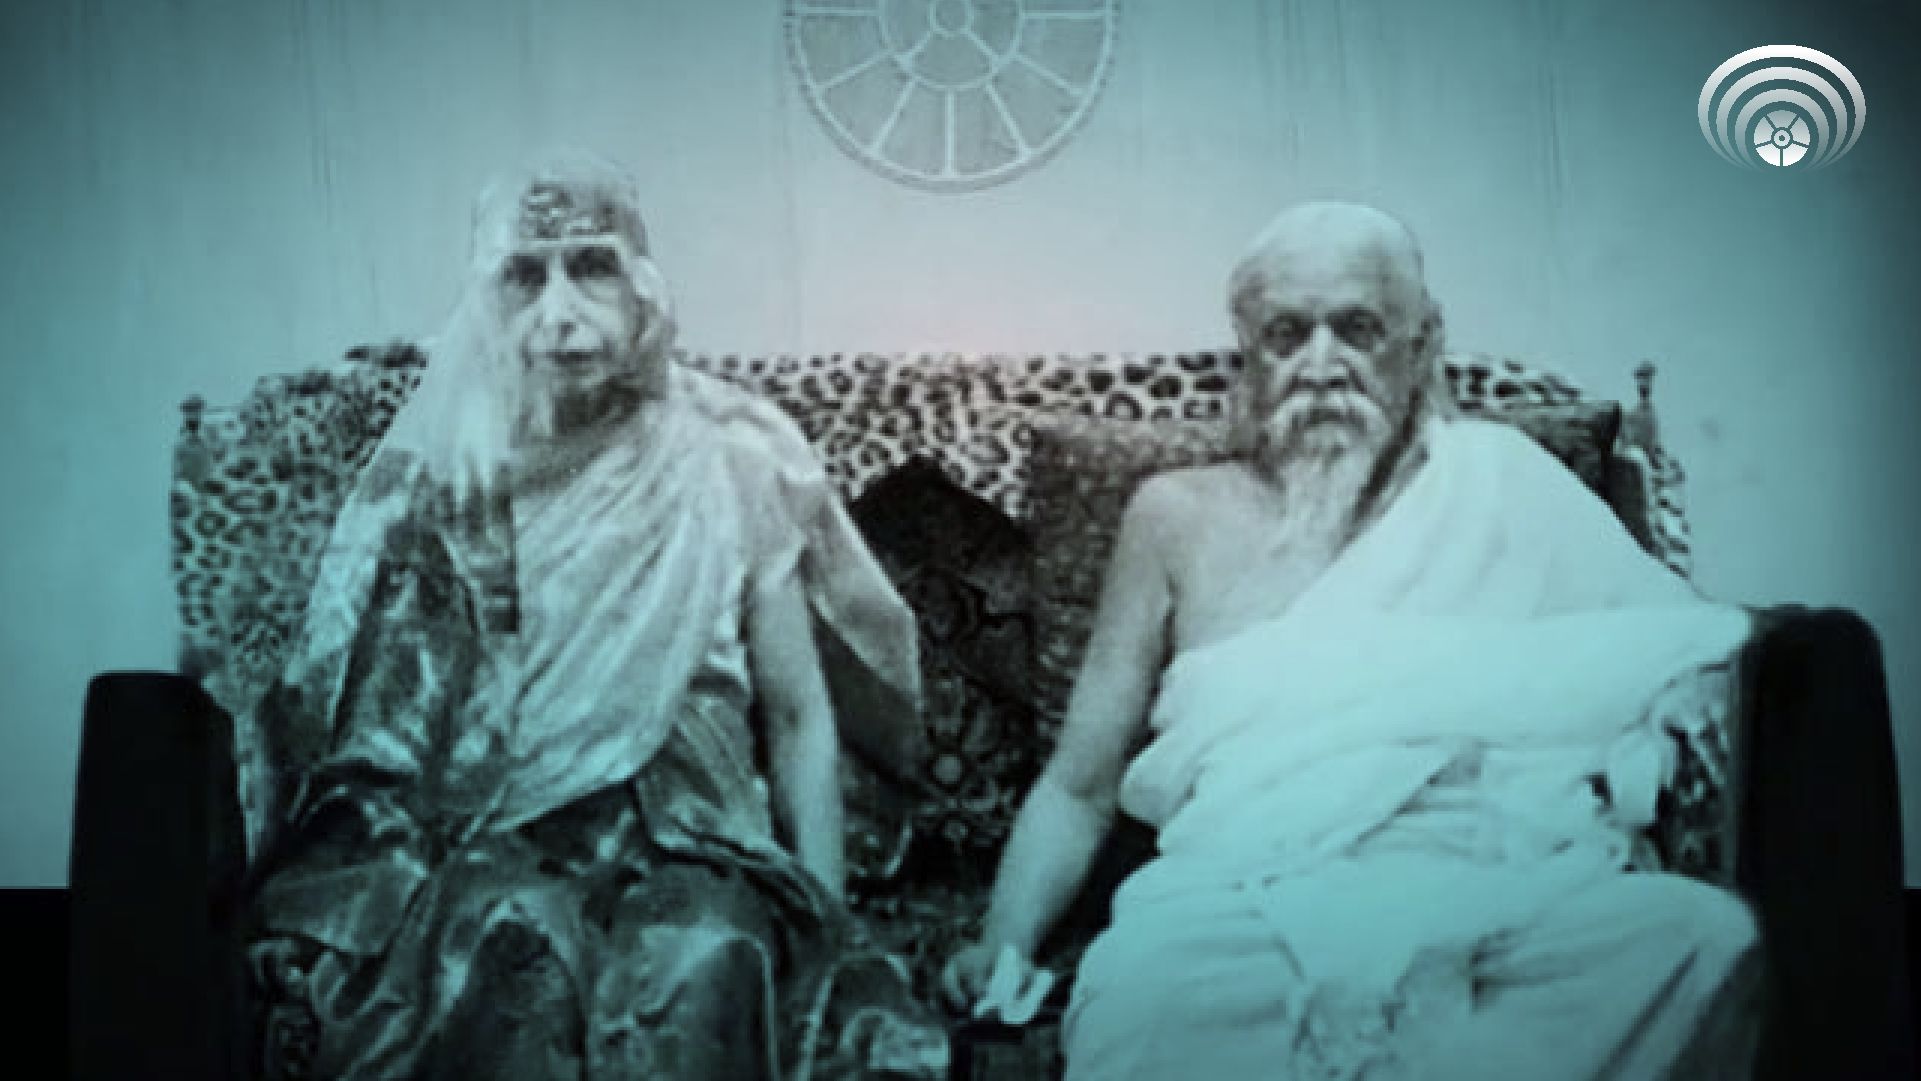 The Guiding Lights: Sri Aurobindo and The Mother of Auroville